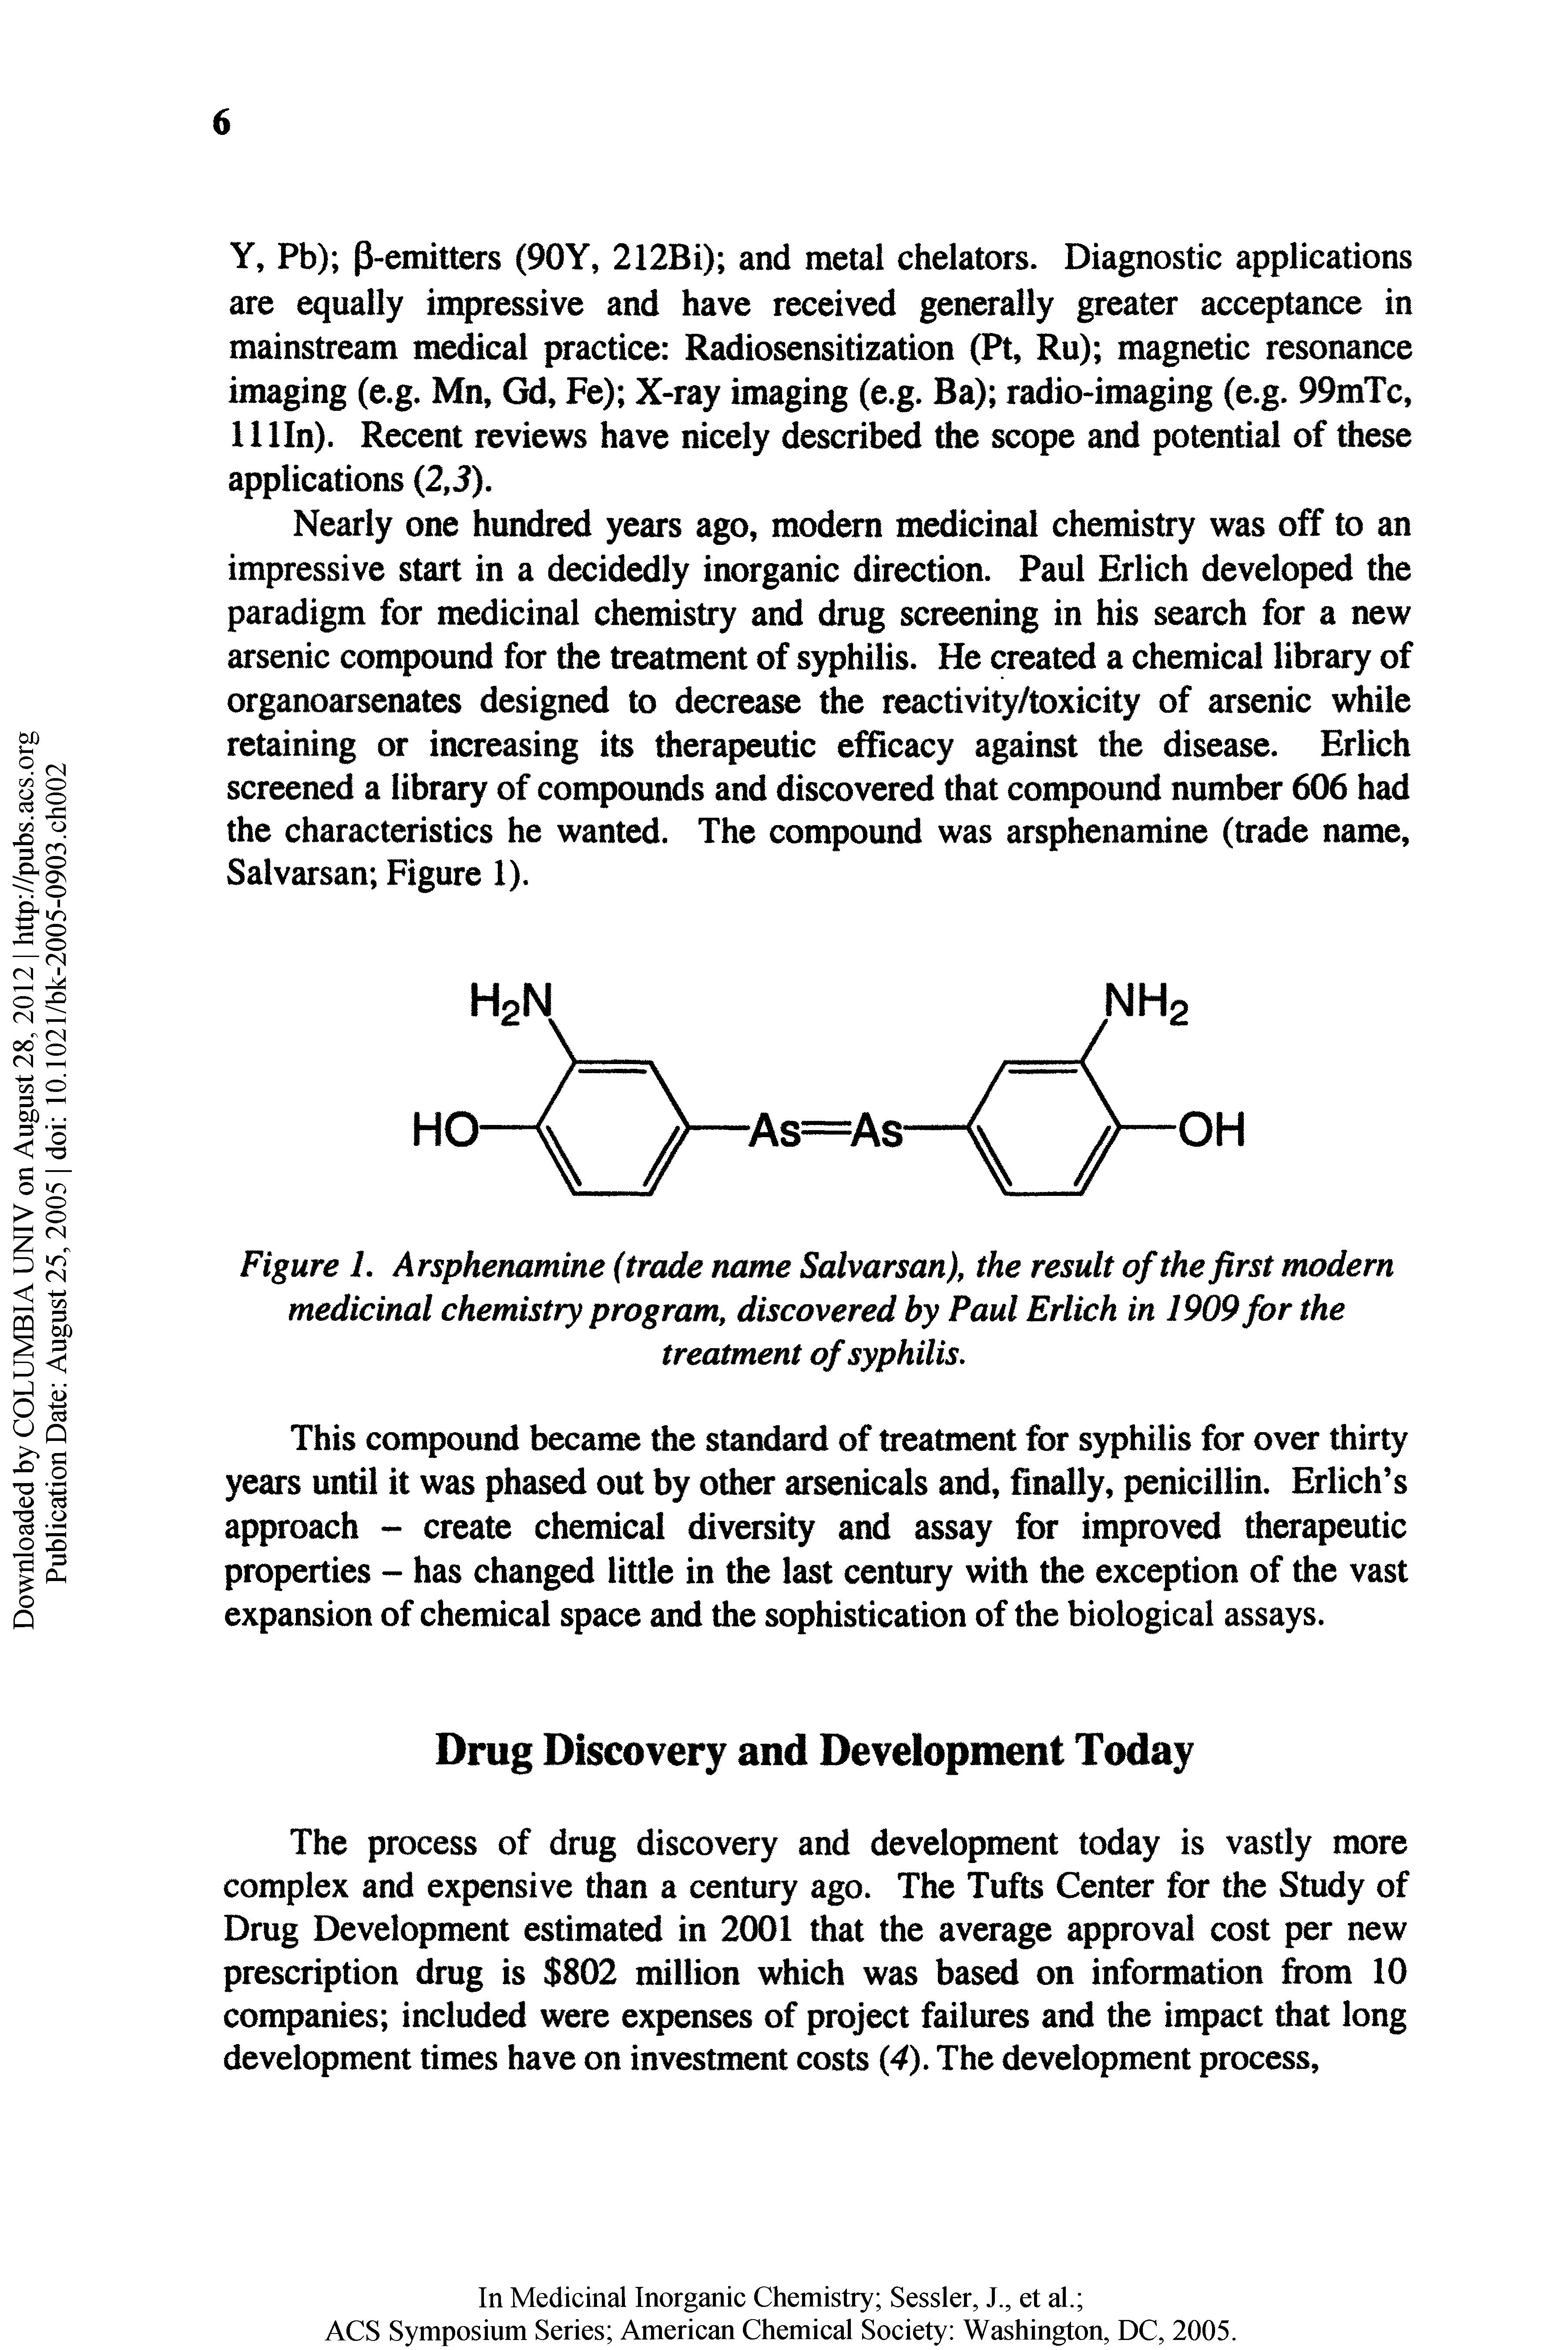 Figure 1. Arsphenamine (trade name Salvarsan), the result of the first modern medicinal chemistry program, discovered by Paul Erlich in 1909for the treatment of syphilis.